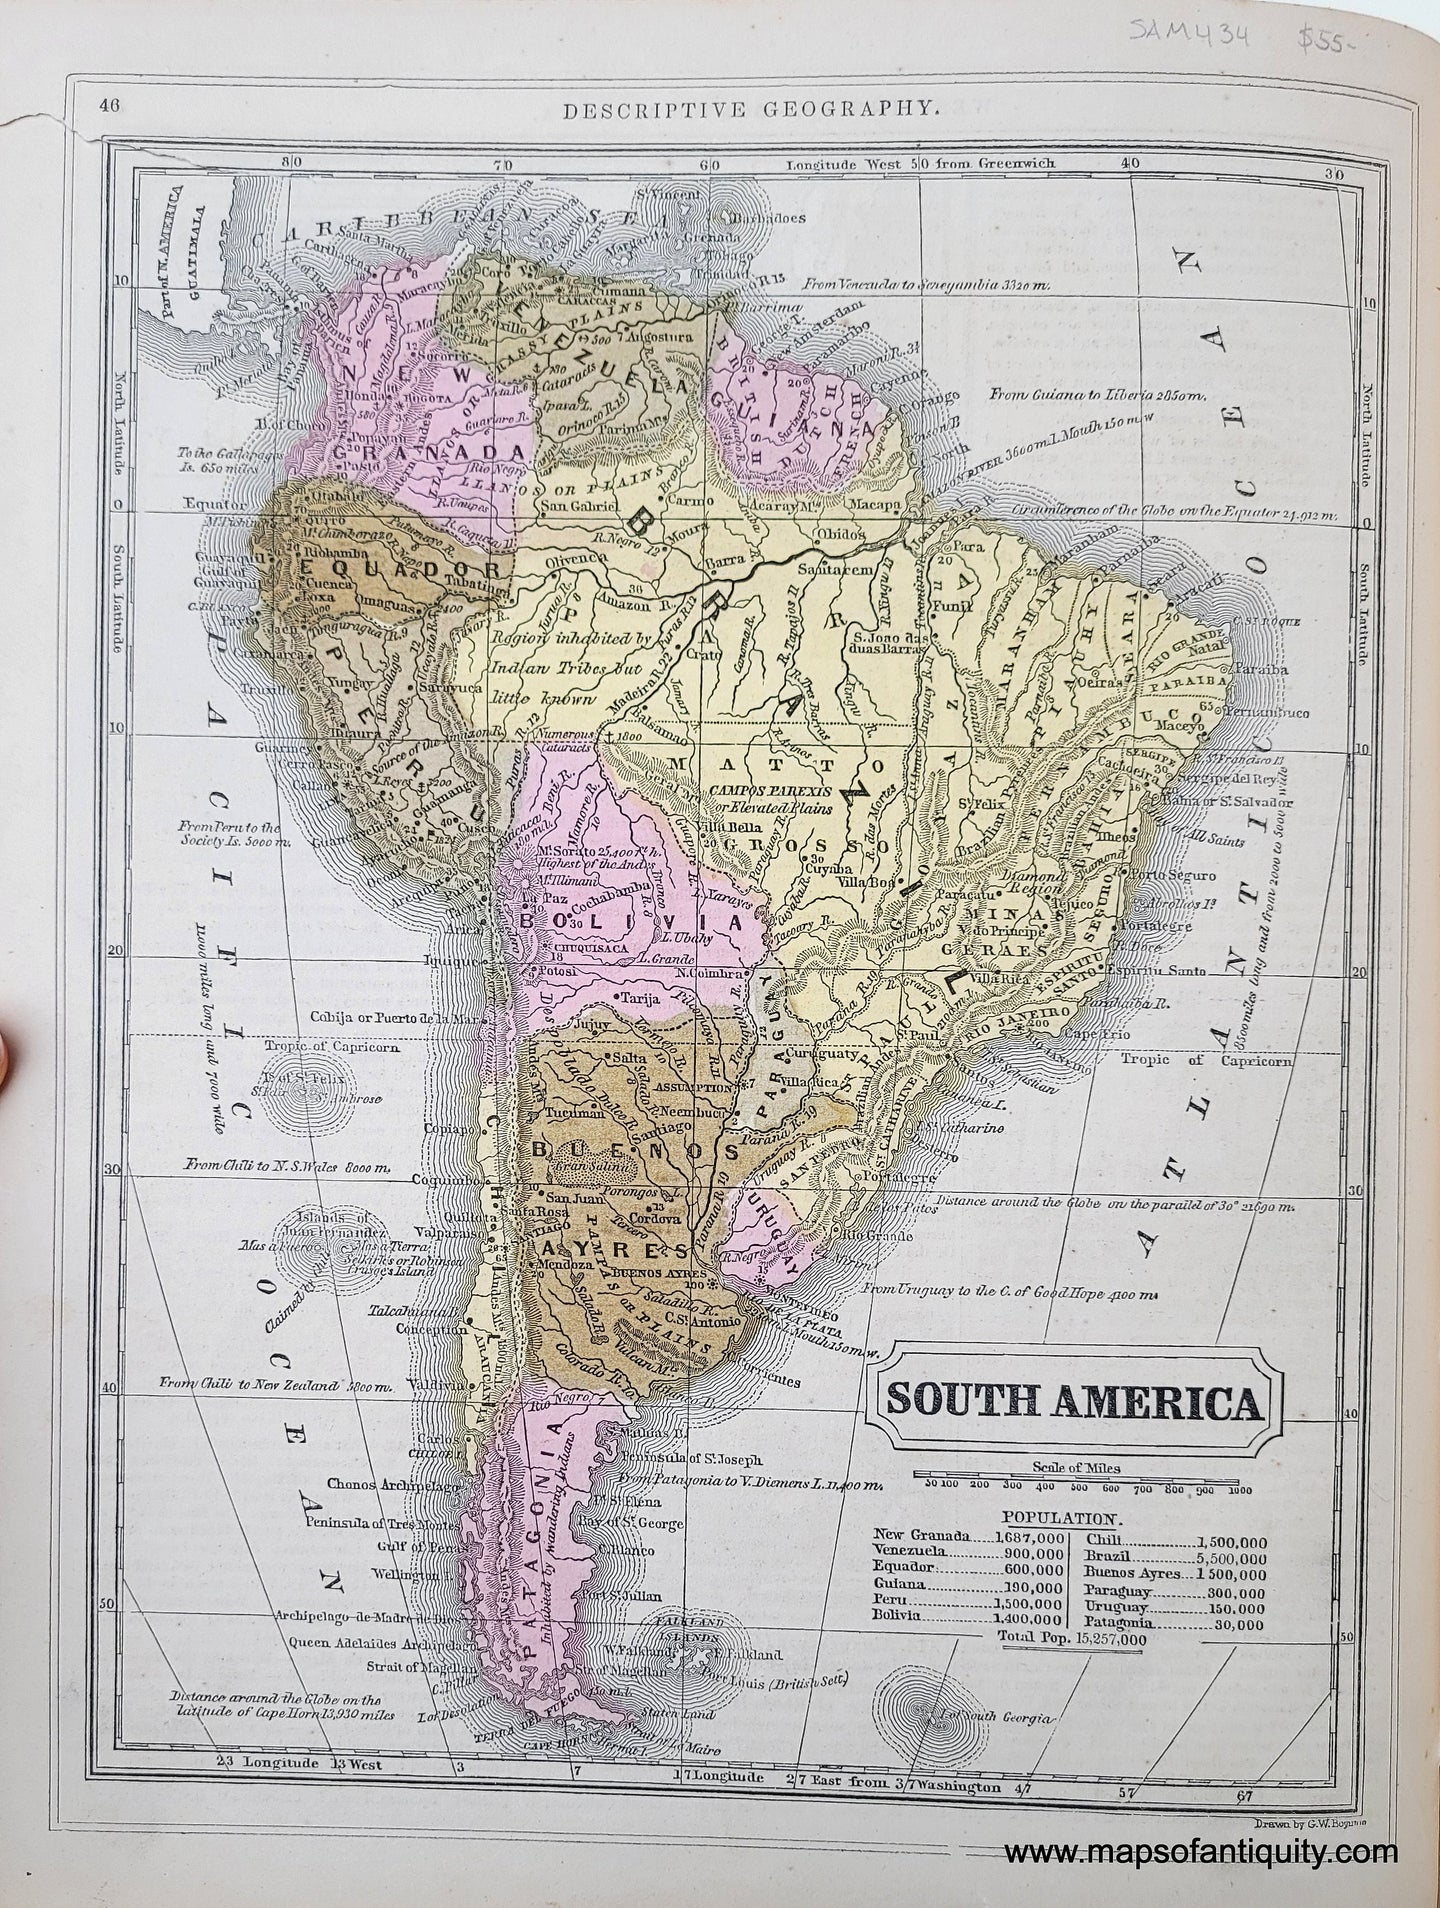 Genuine-Antique-Hand-Colored-Map-Double-sided-page-South-America-verso-West-Indies-1850-Mitchell-Thomas-Cowperthwait-Co--Maps-Of-Antiquity